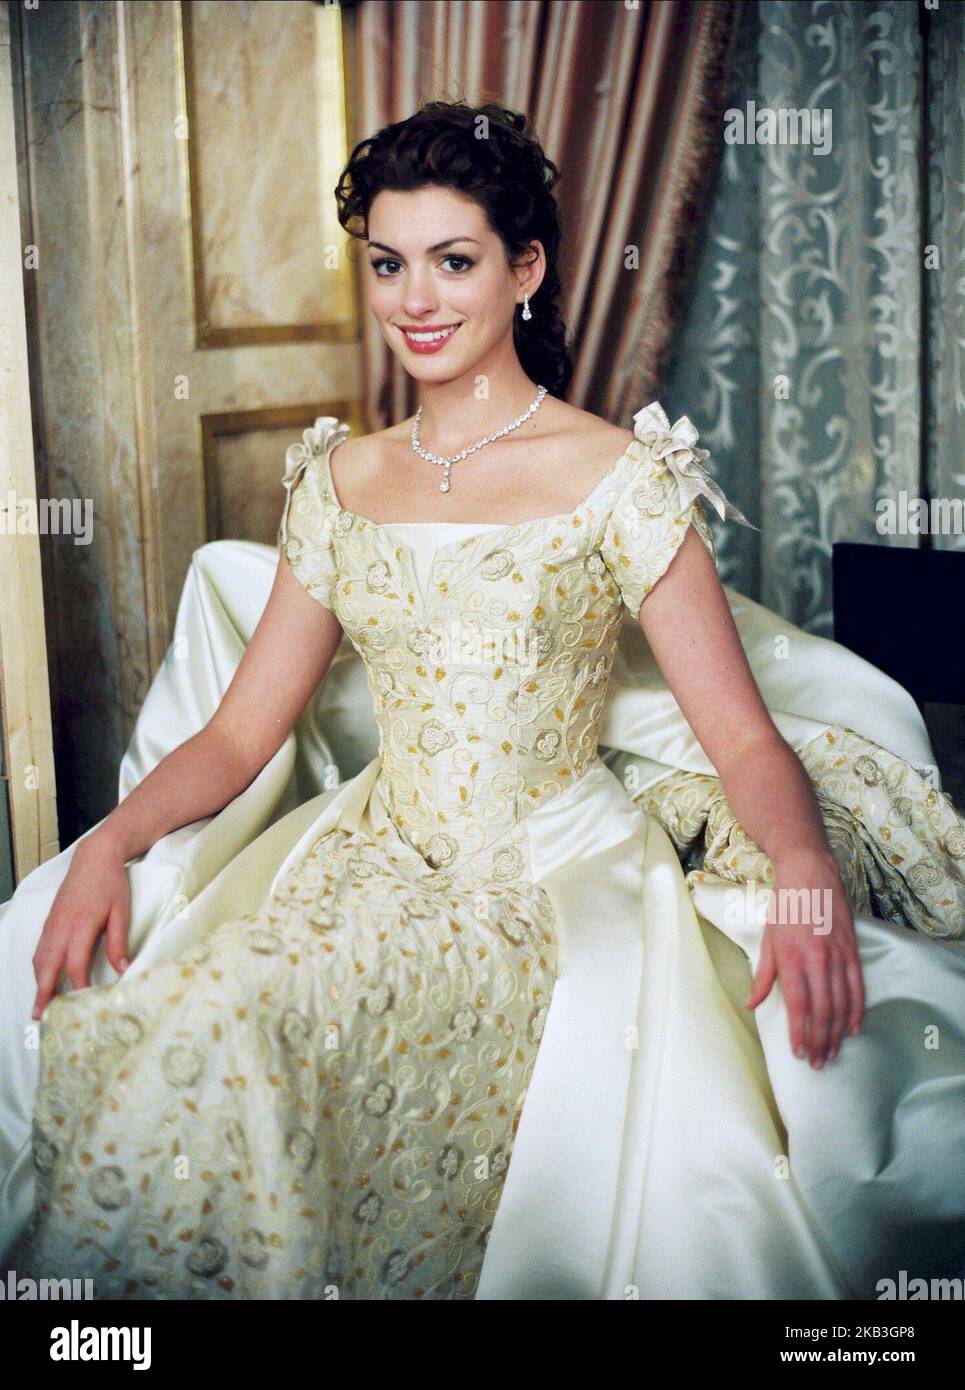 THE PRINCESS DIARIES 2: ROYAL ENGAGEMENT, ANNE HATHAWAY, 2004 Foto Stock